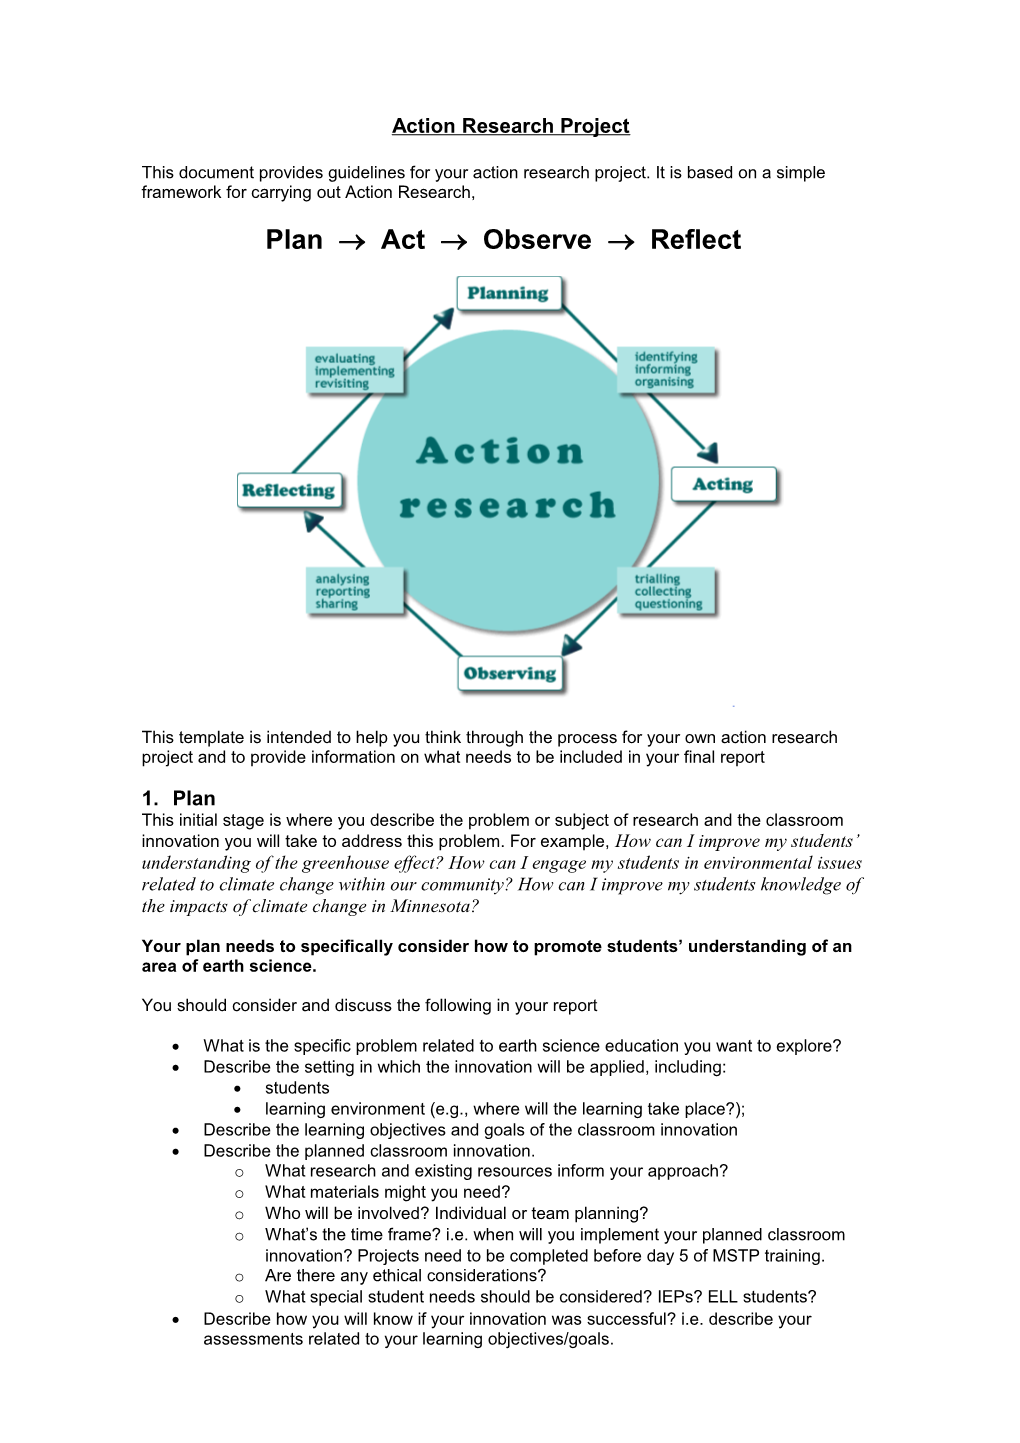 Template for Planning Action Research